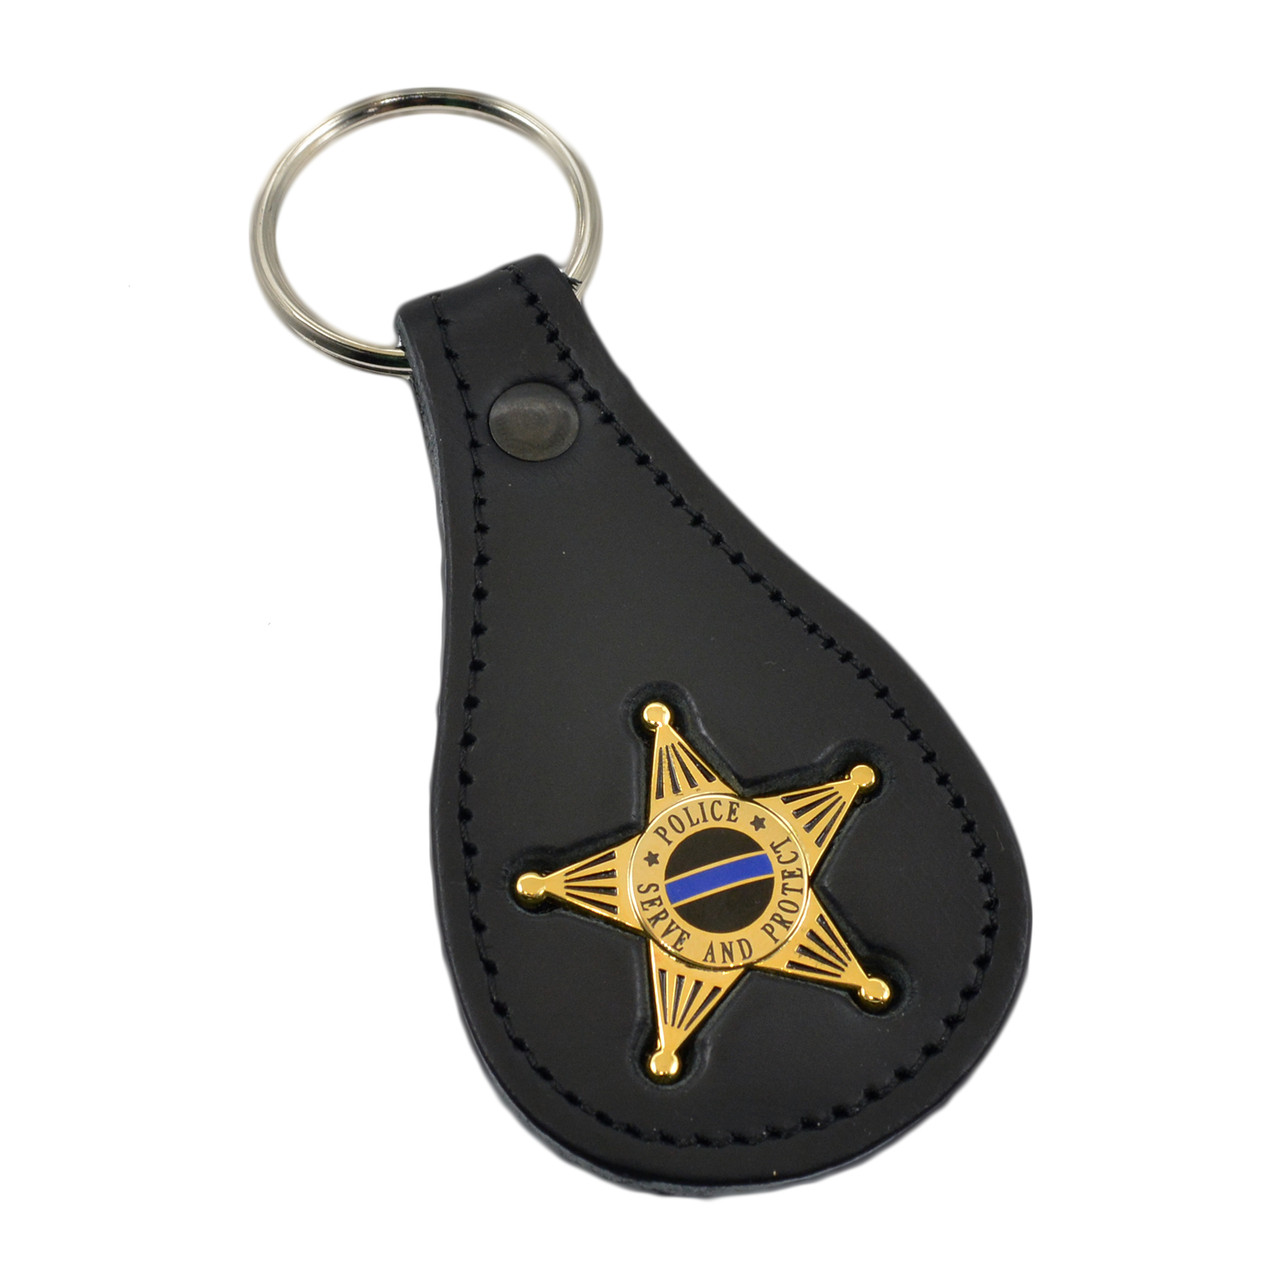 Chaplain Police Badge and Leather ID Holder